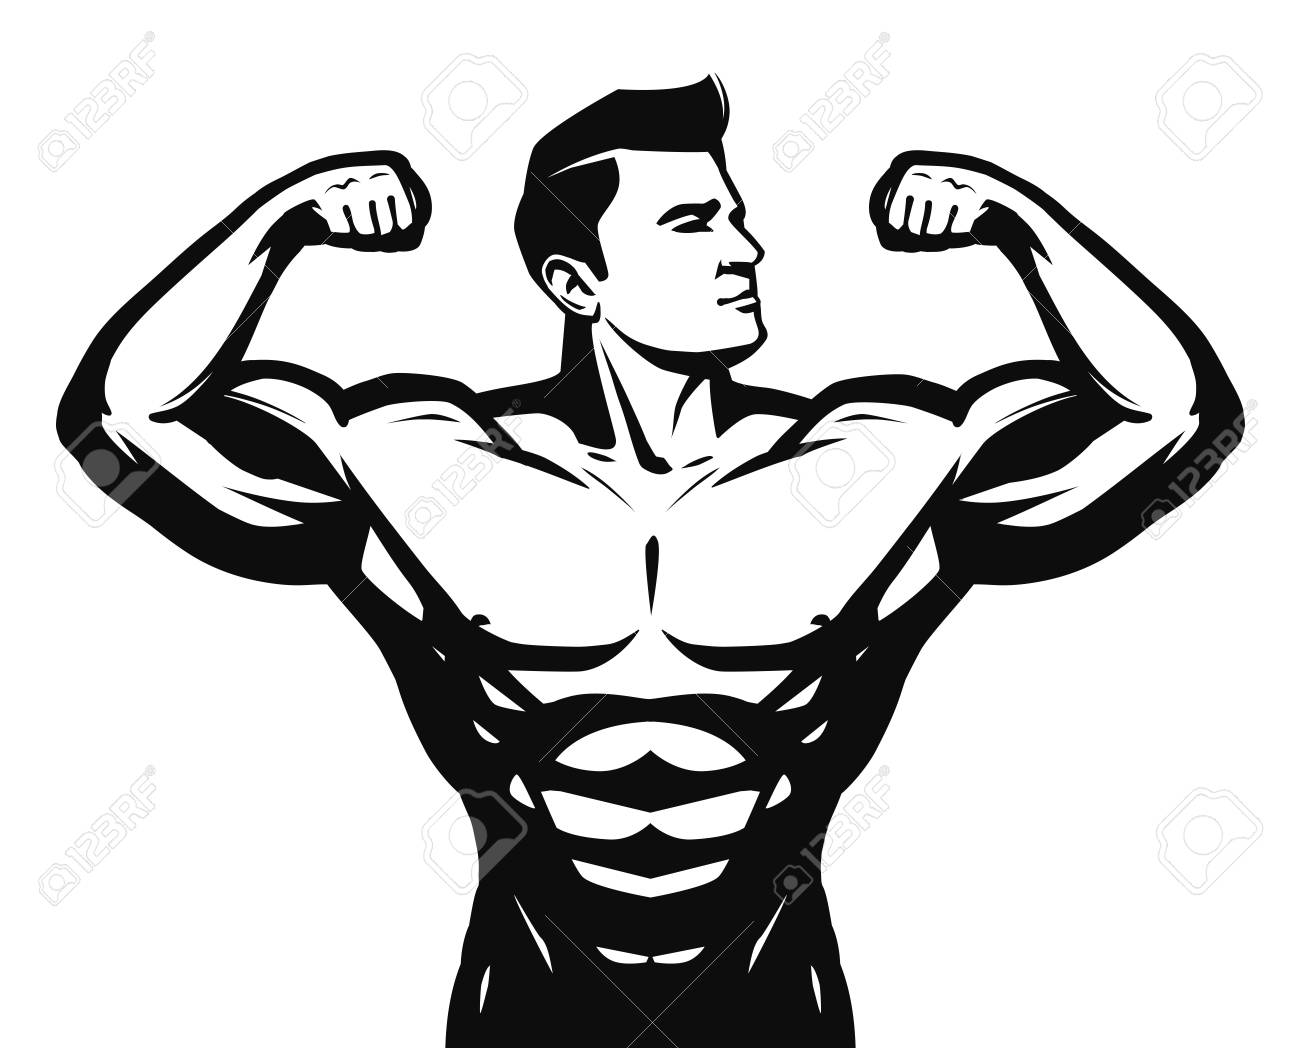 Strong People Clipart.